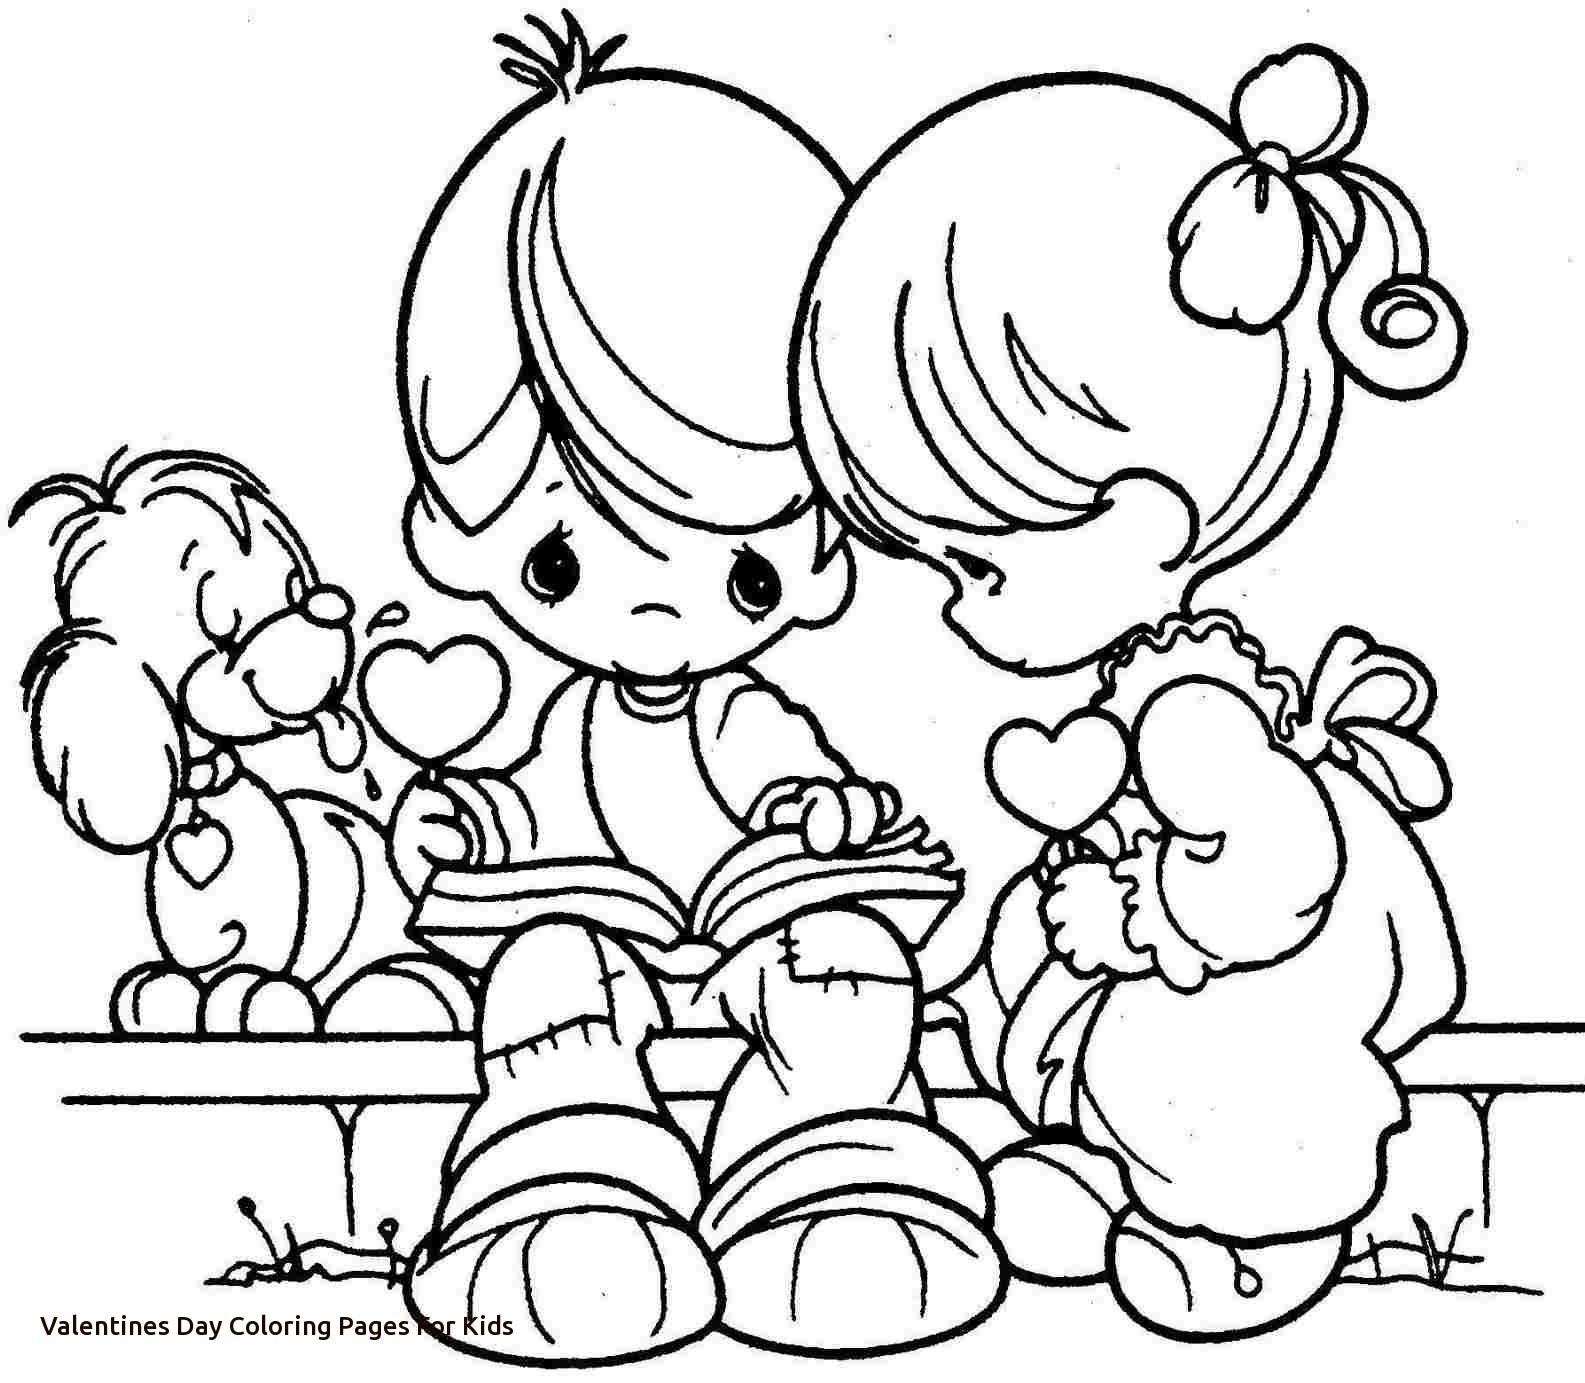 mae-jemison-coloring-page-at-getcolorings-free-printable